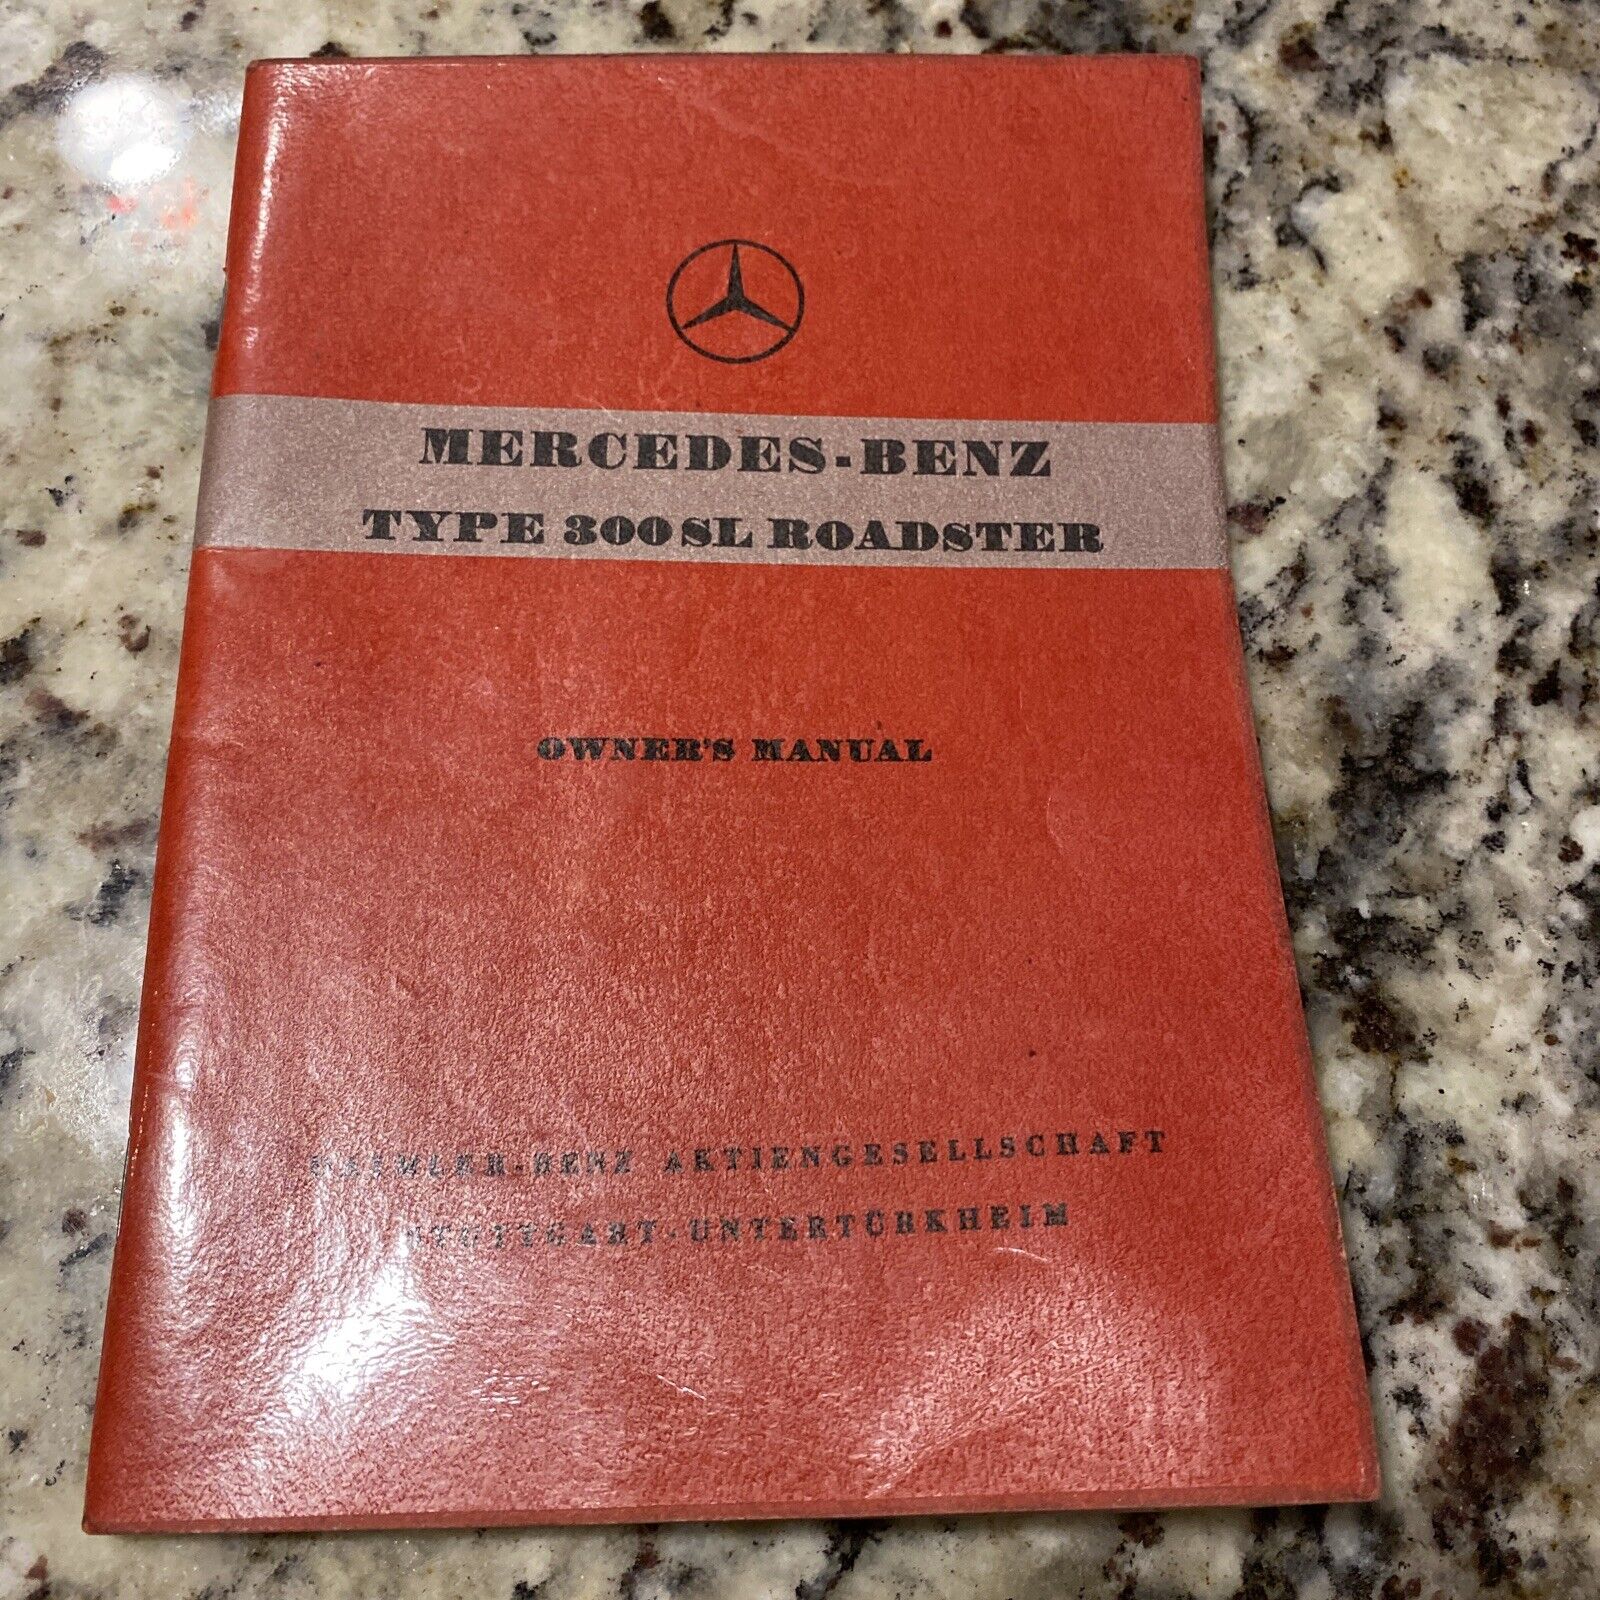 Vintage Mercedes-Benz 1957-58 300 SL Roadster Owners Manual Edition B - rare car